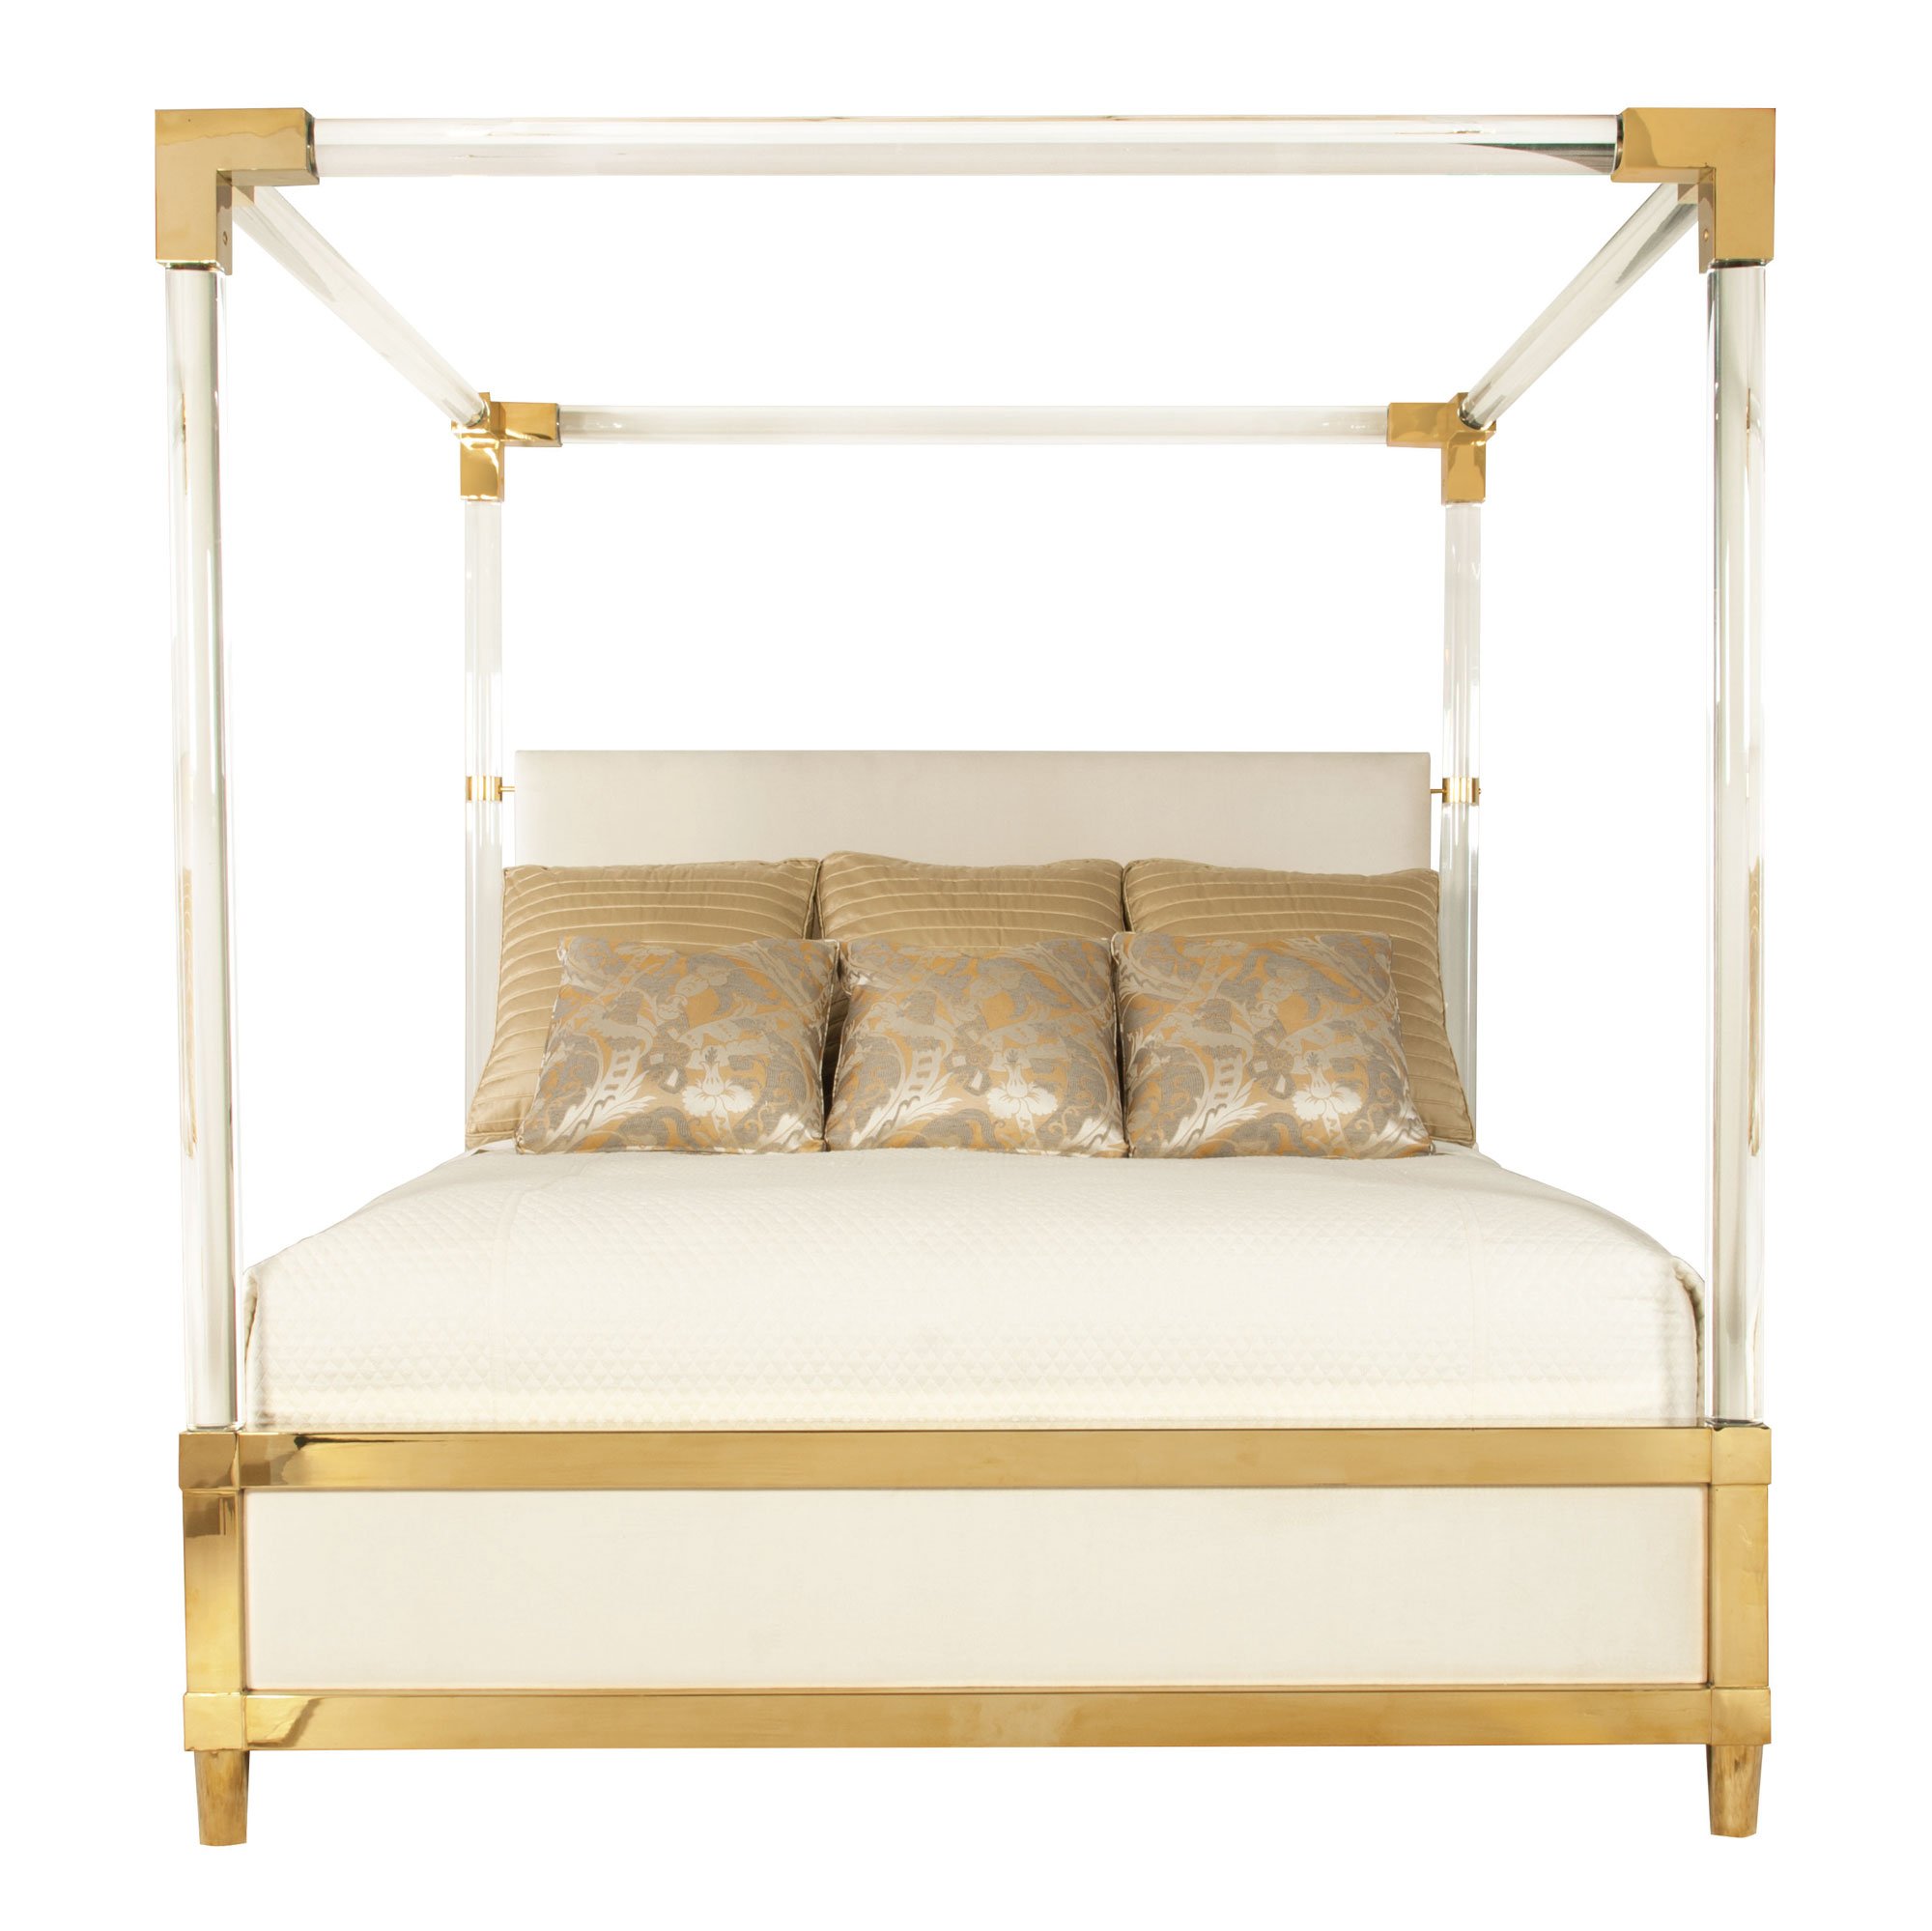 Acrylic Furniture Bed, Acrylic Bed Frame